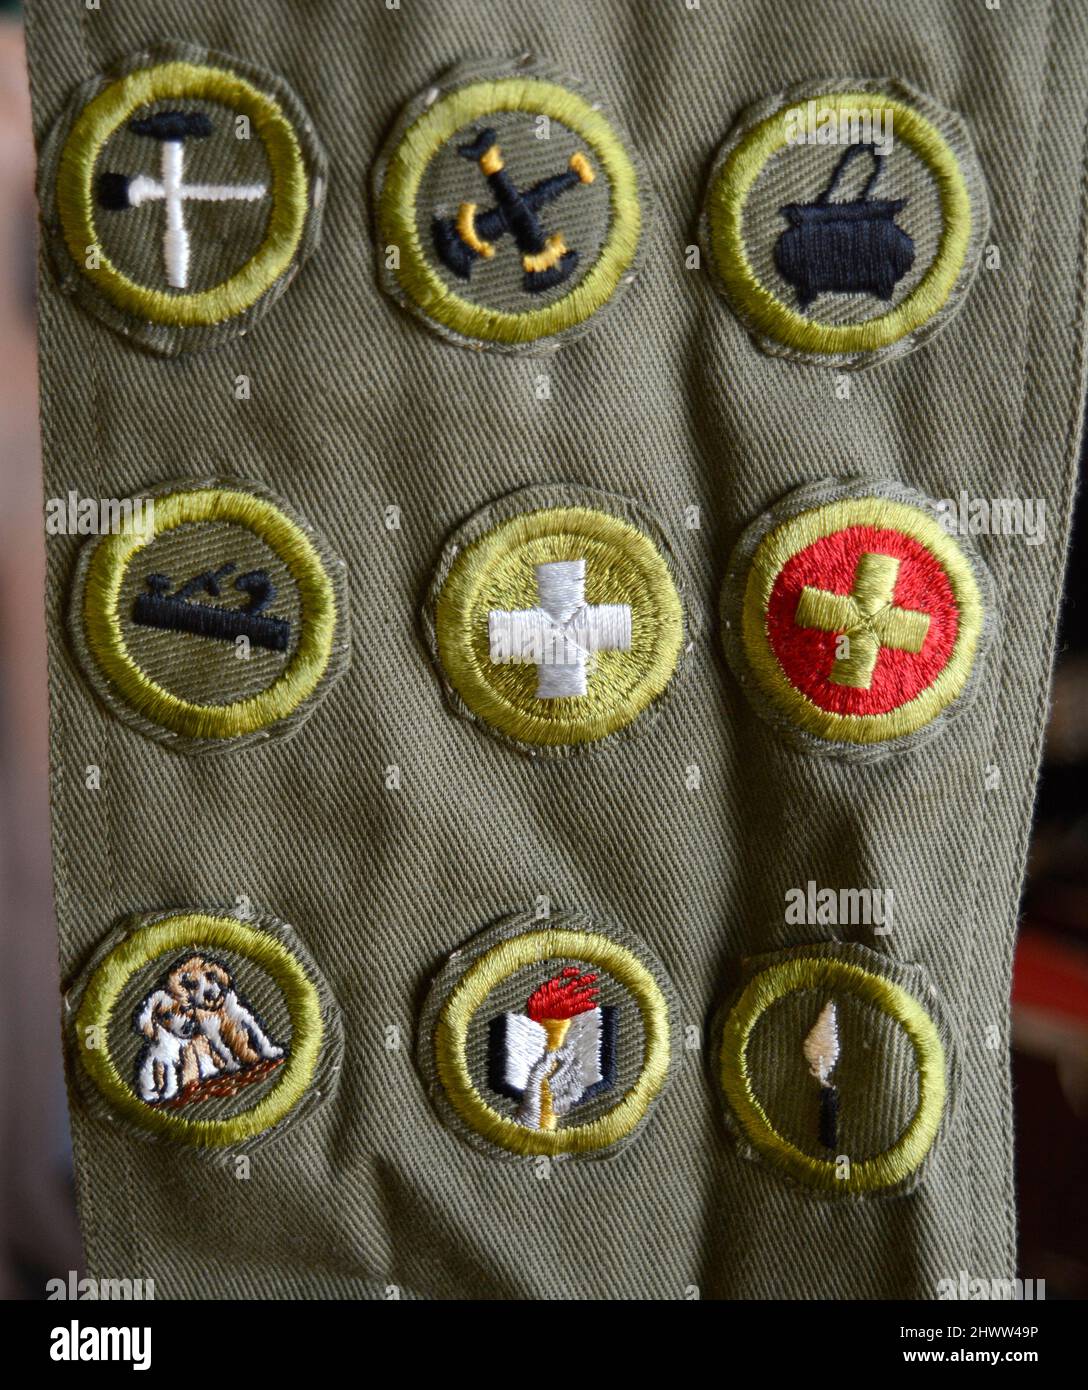 A selection of vintage Cub Scout merit badges on a sash for sale in an antique shop in Santa Fe, New Mexico. Stock Photo